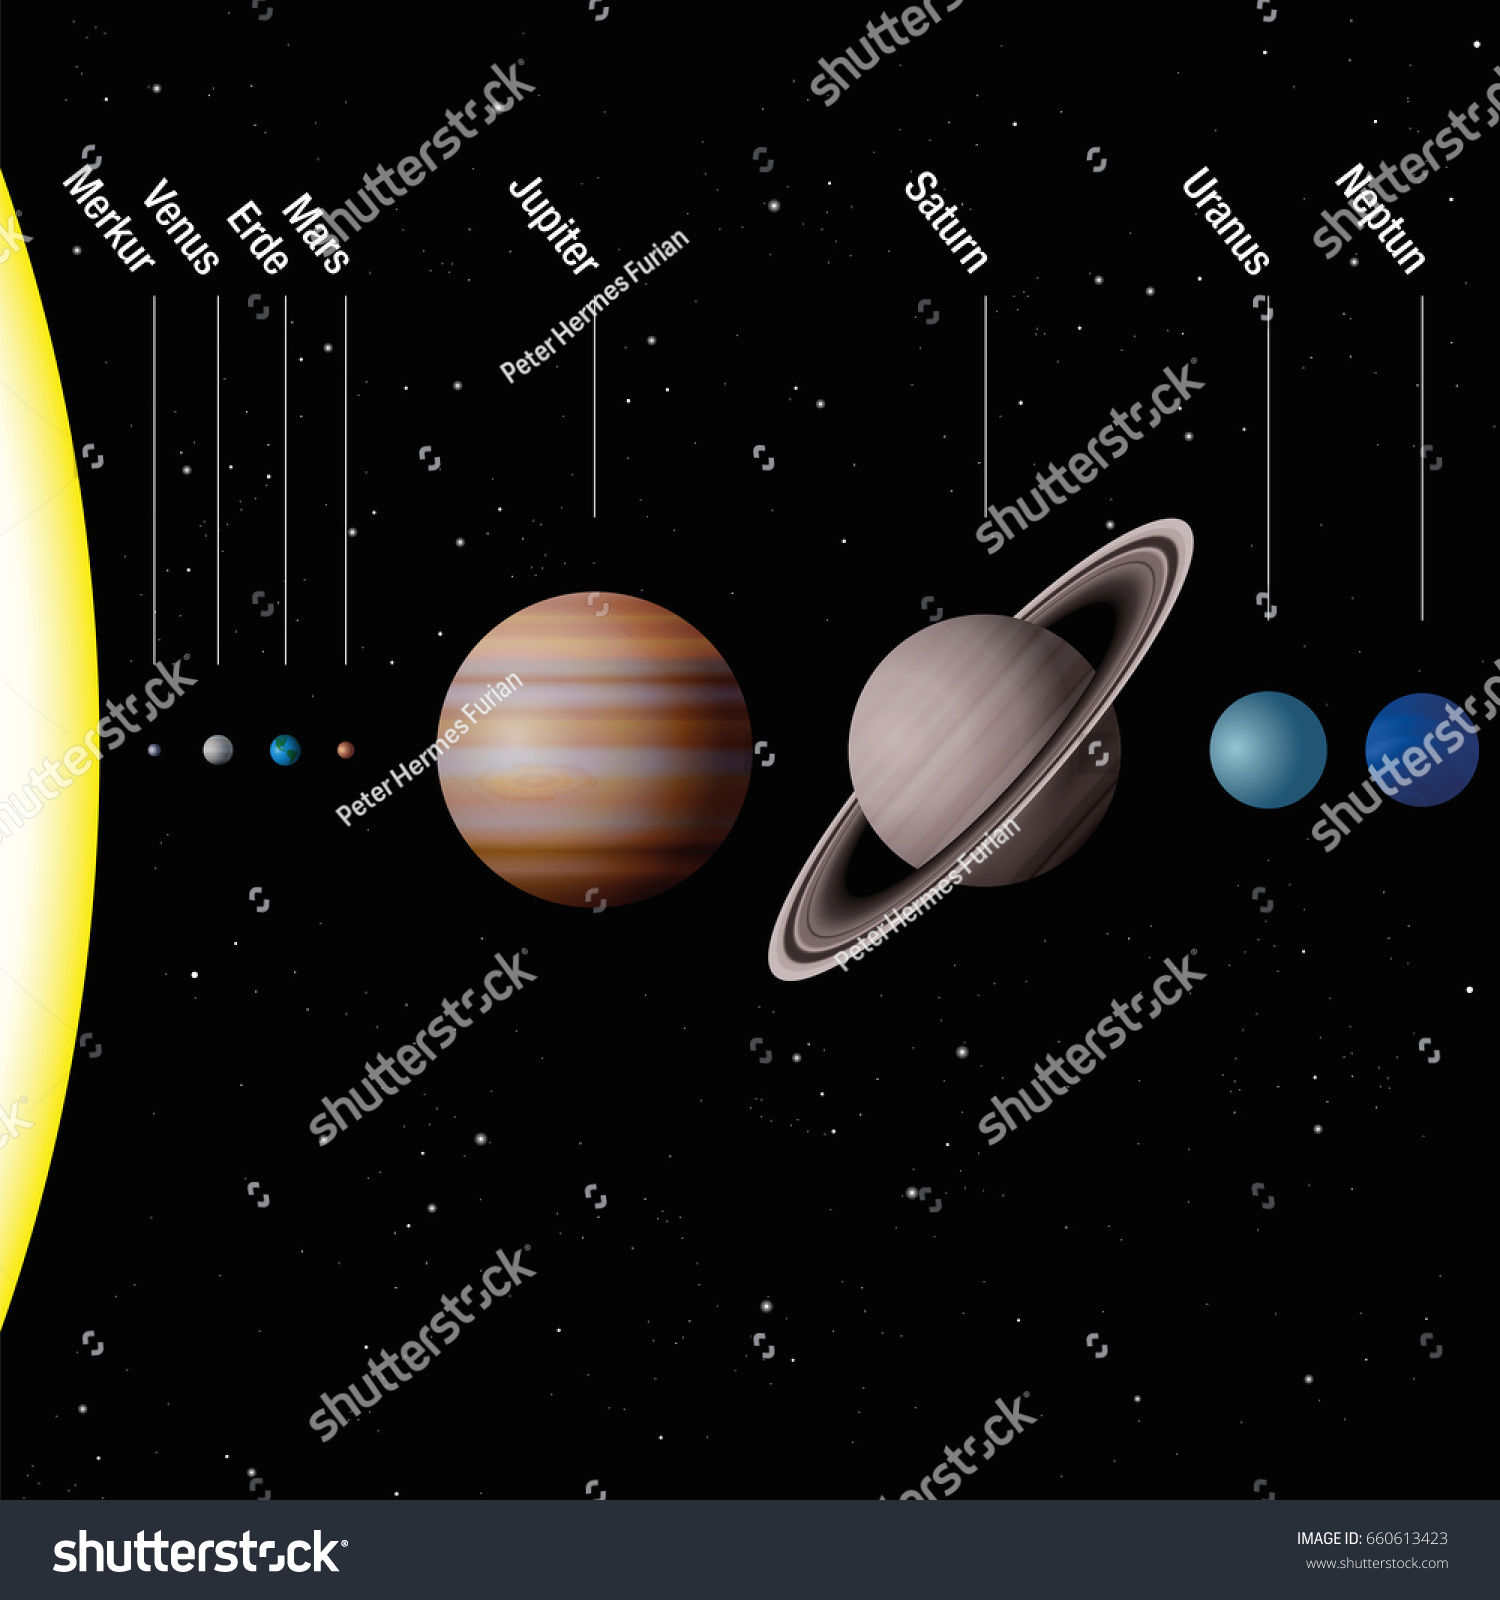 Planets Our Solar System True Scale Stock Vector (Royalty Free ...